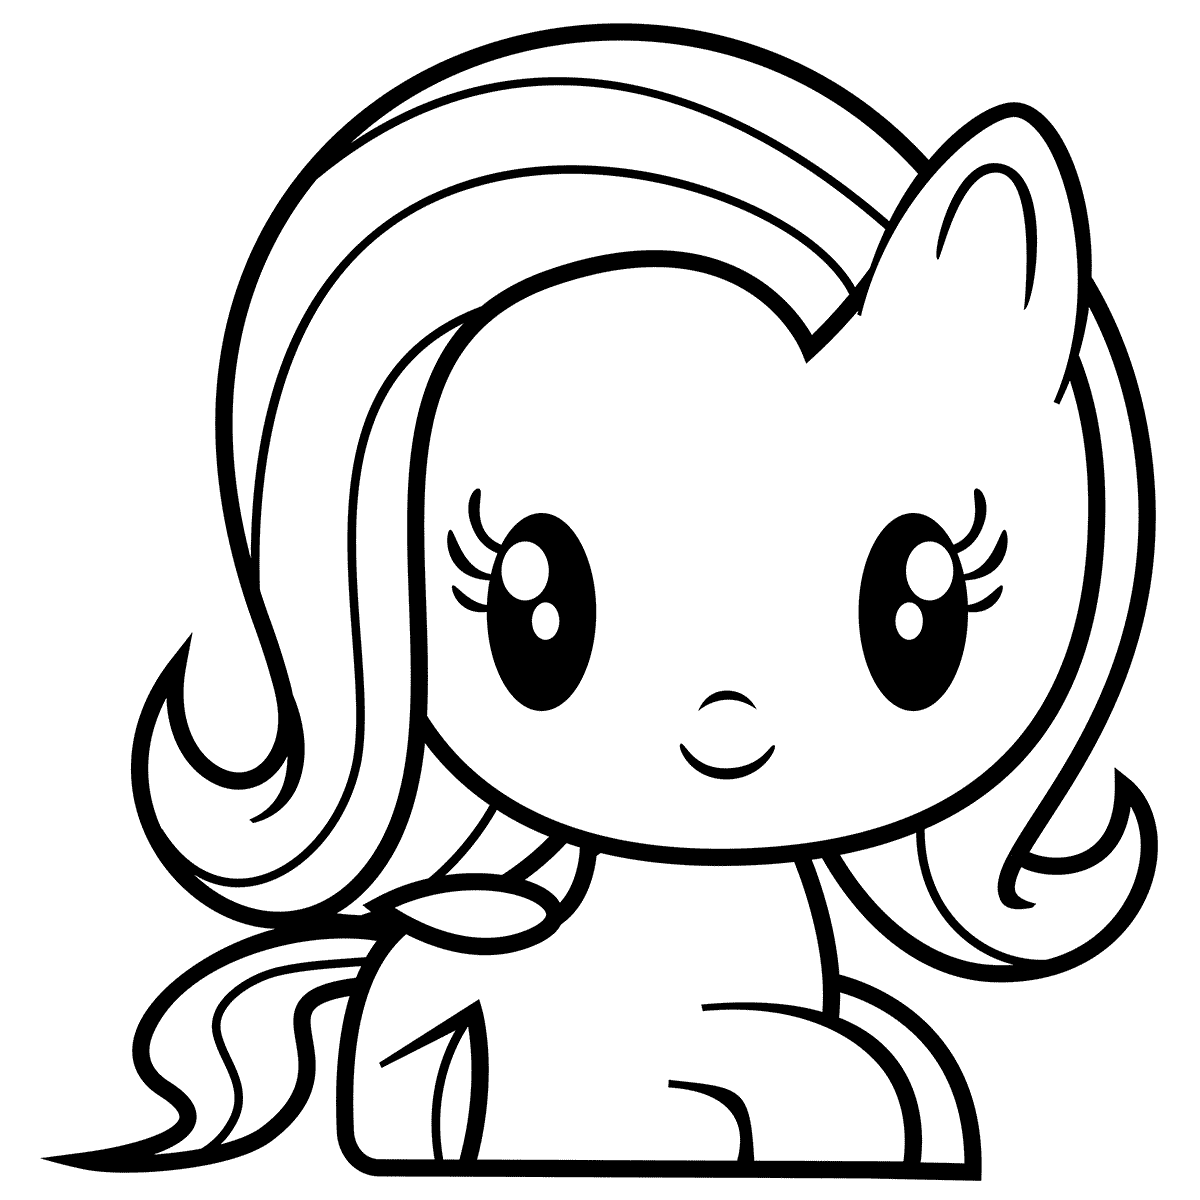 Little Pony Fluttershy Coloring Pages   Coloring Cool